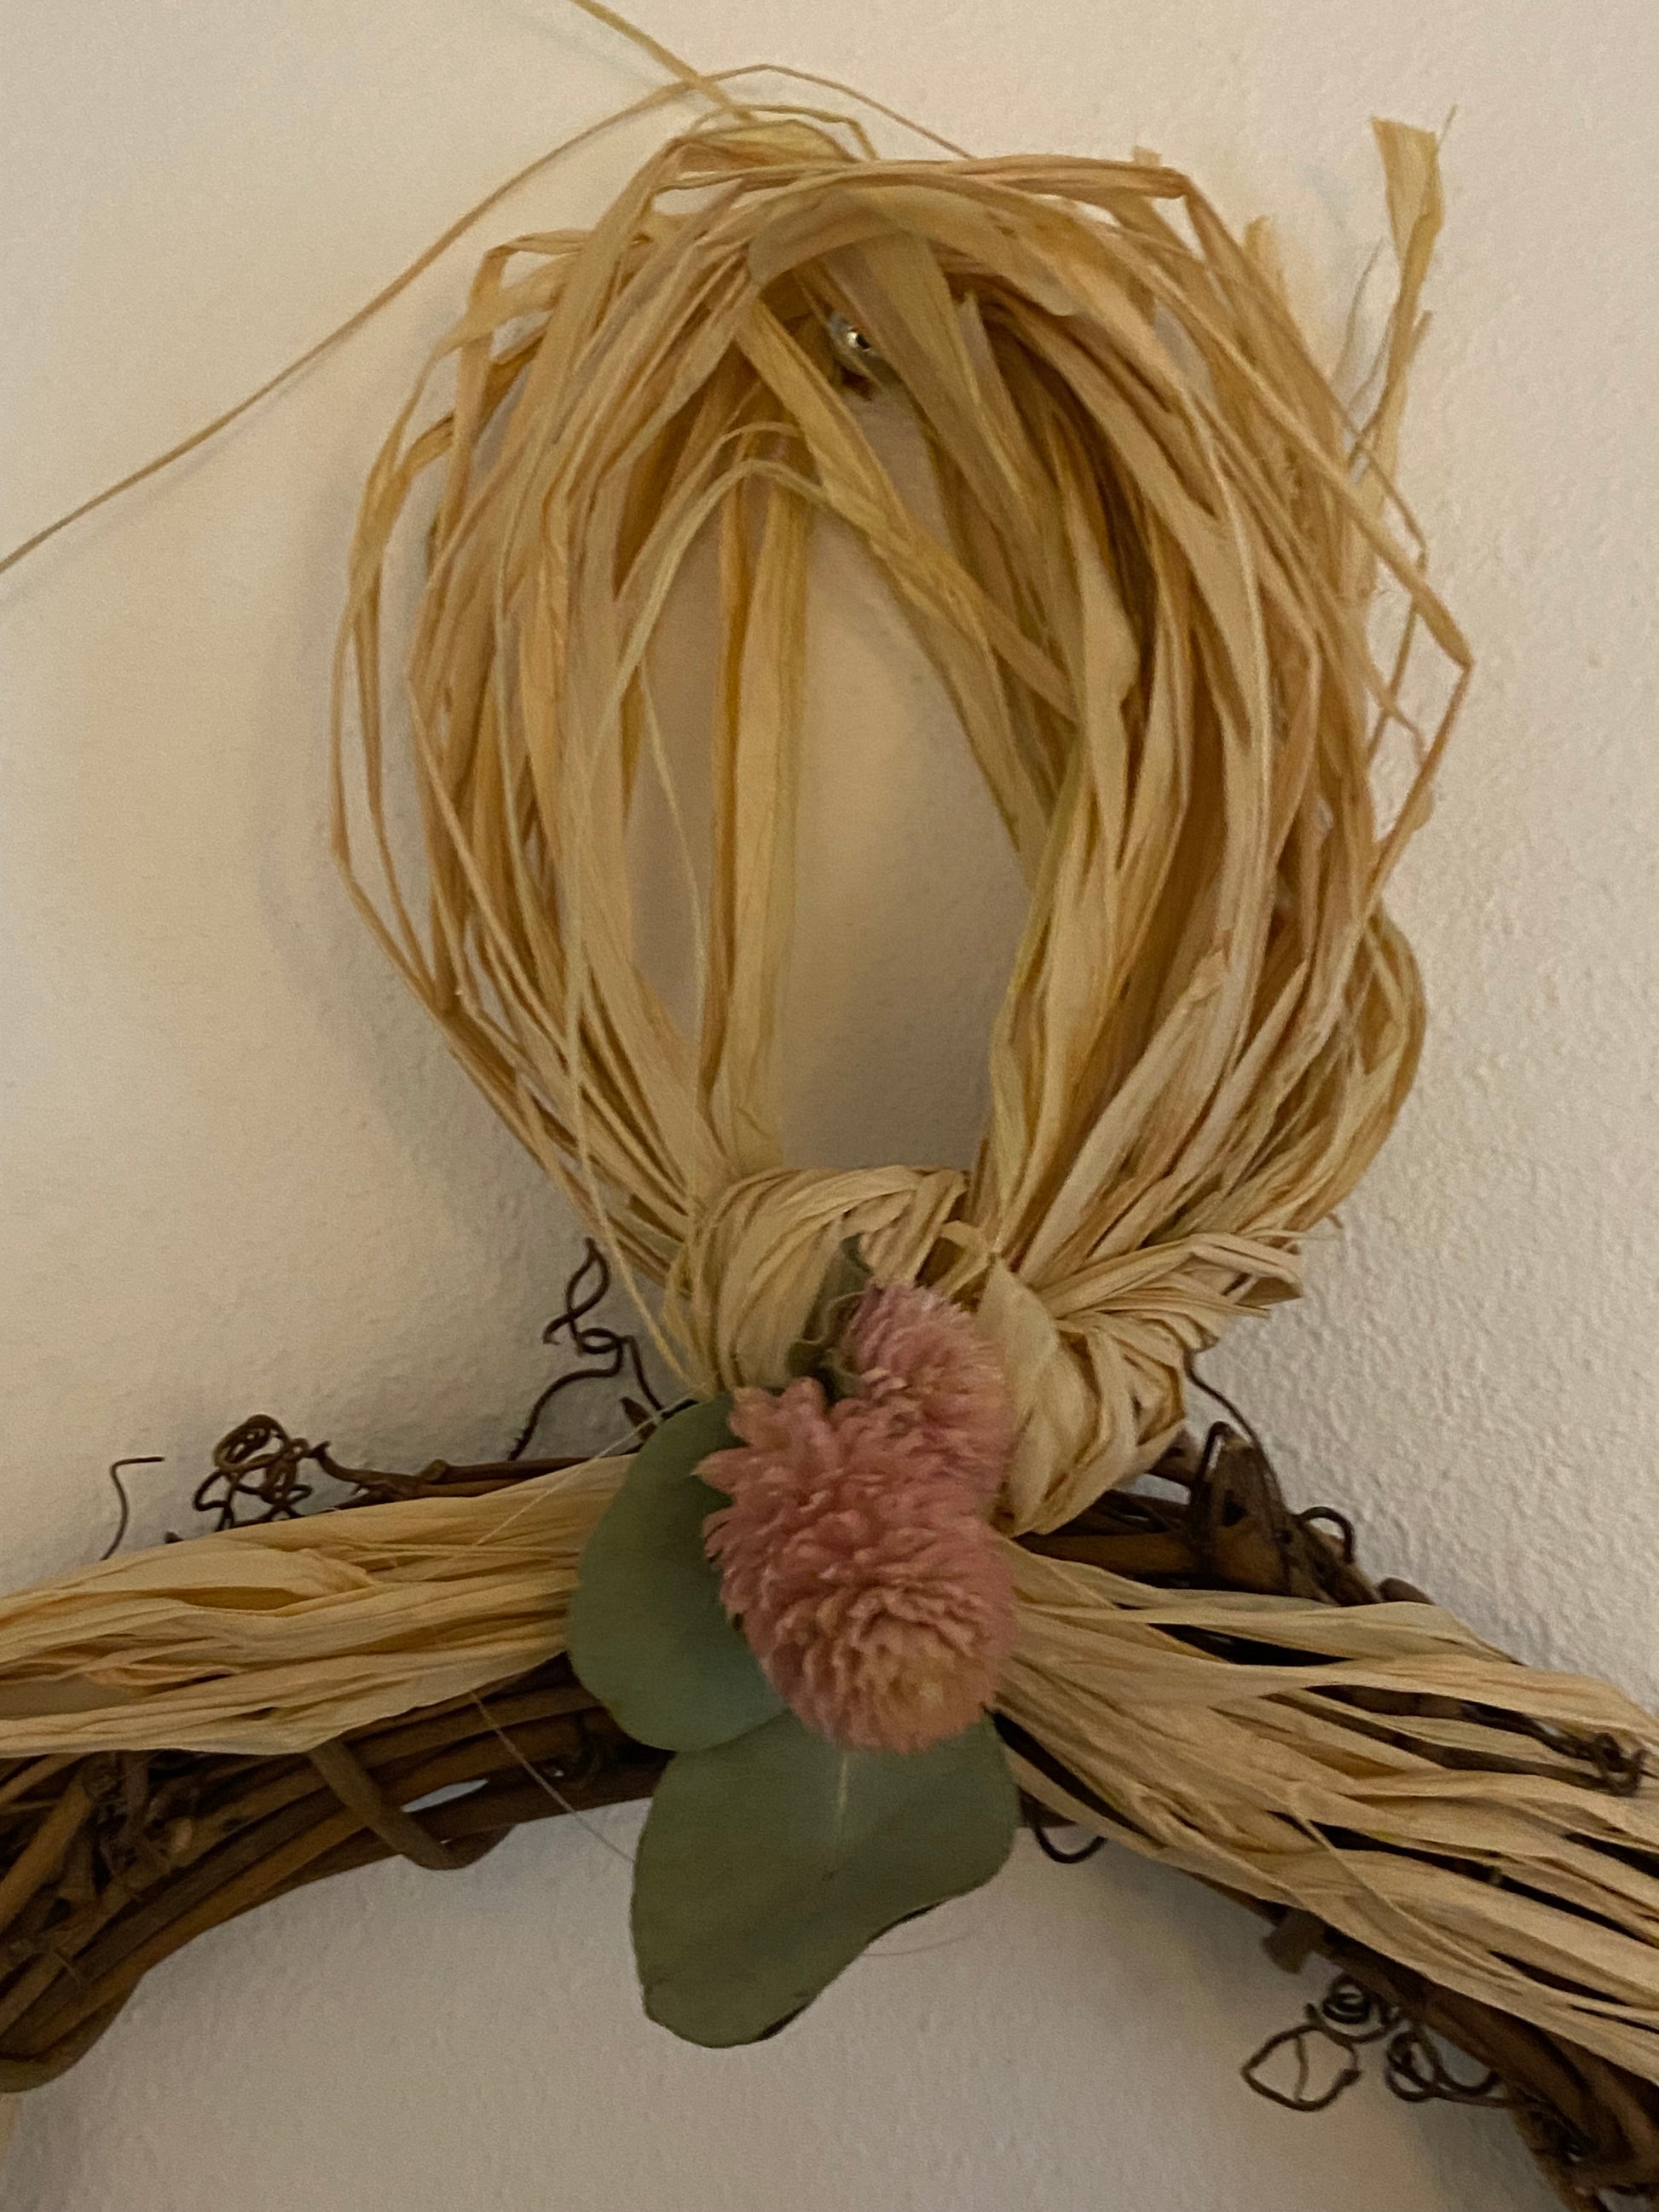 Botanical Natural hanging Dried Flower wreath wall art decoration